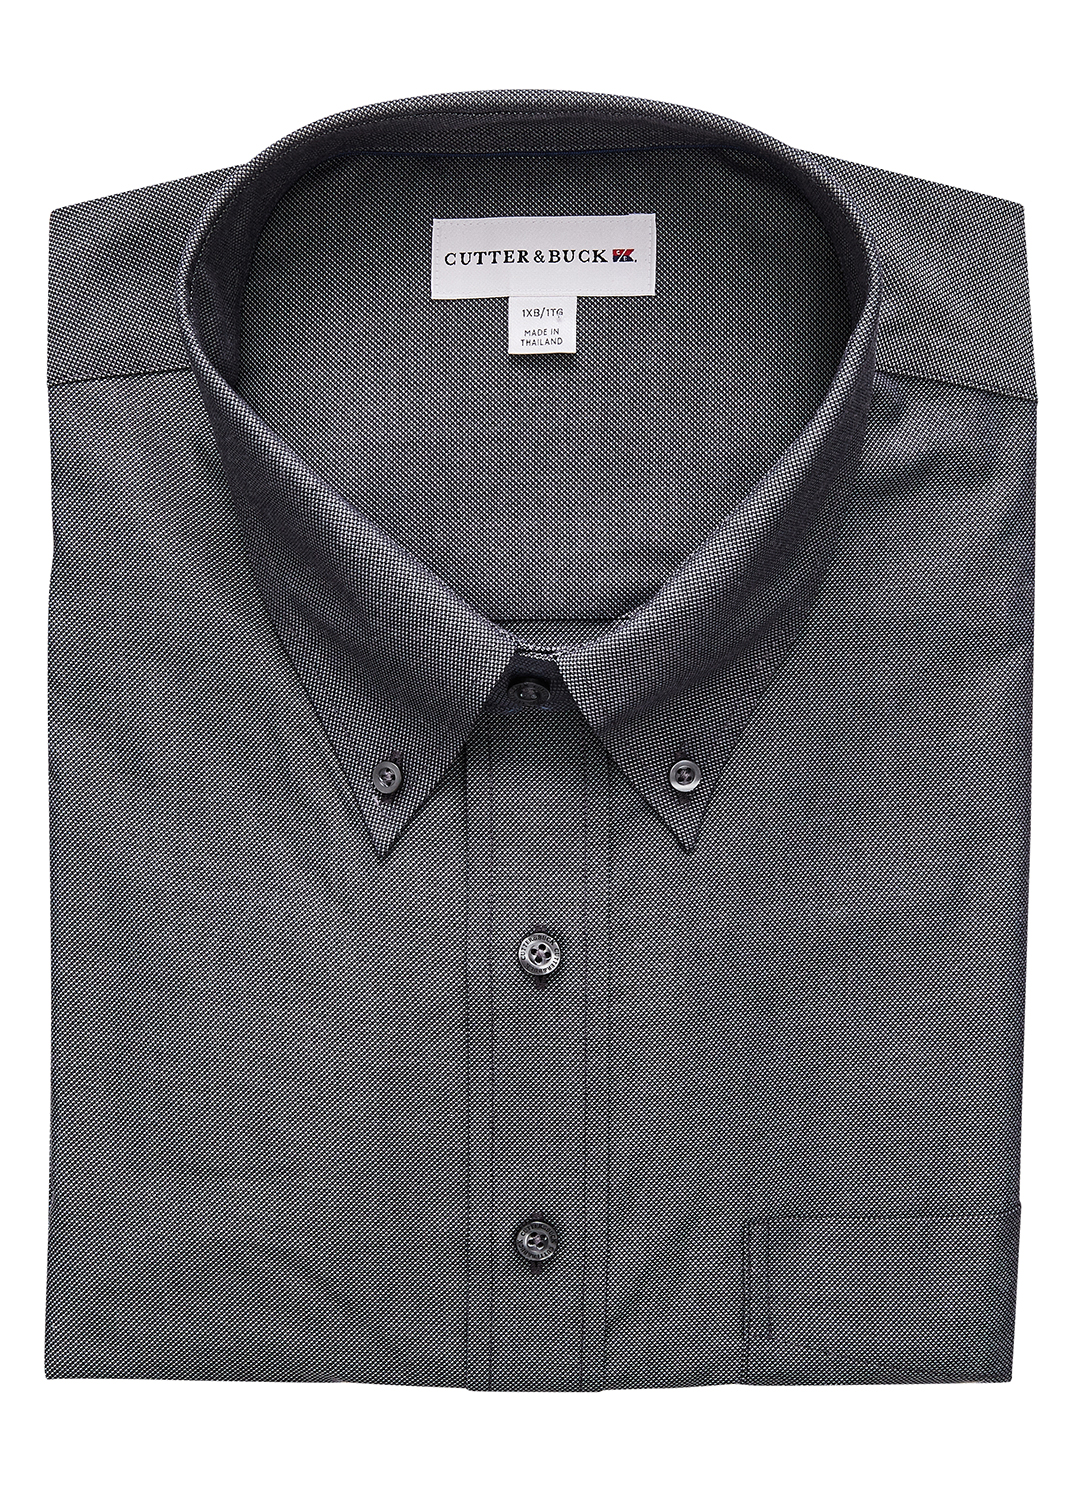 Black Oxford Long Sleeve Shirt - High and Mighty Menswear